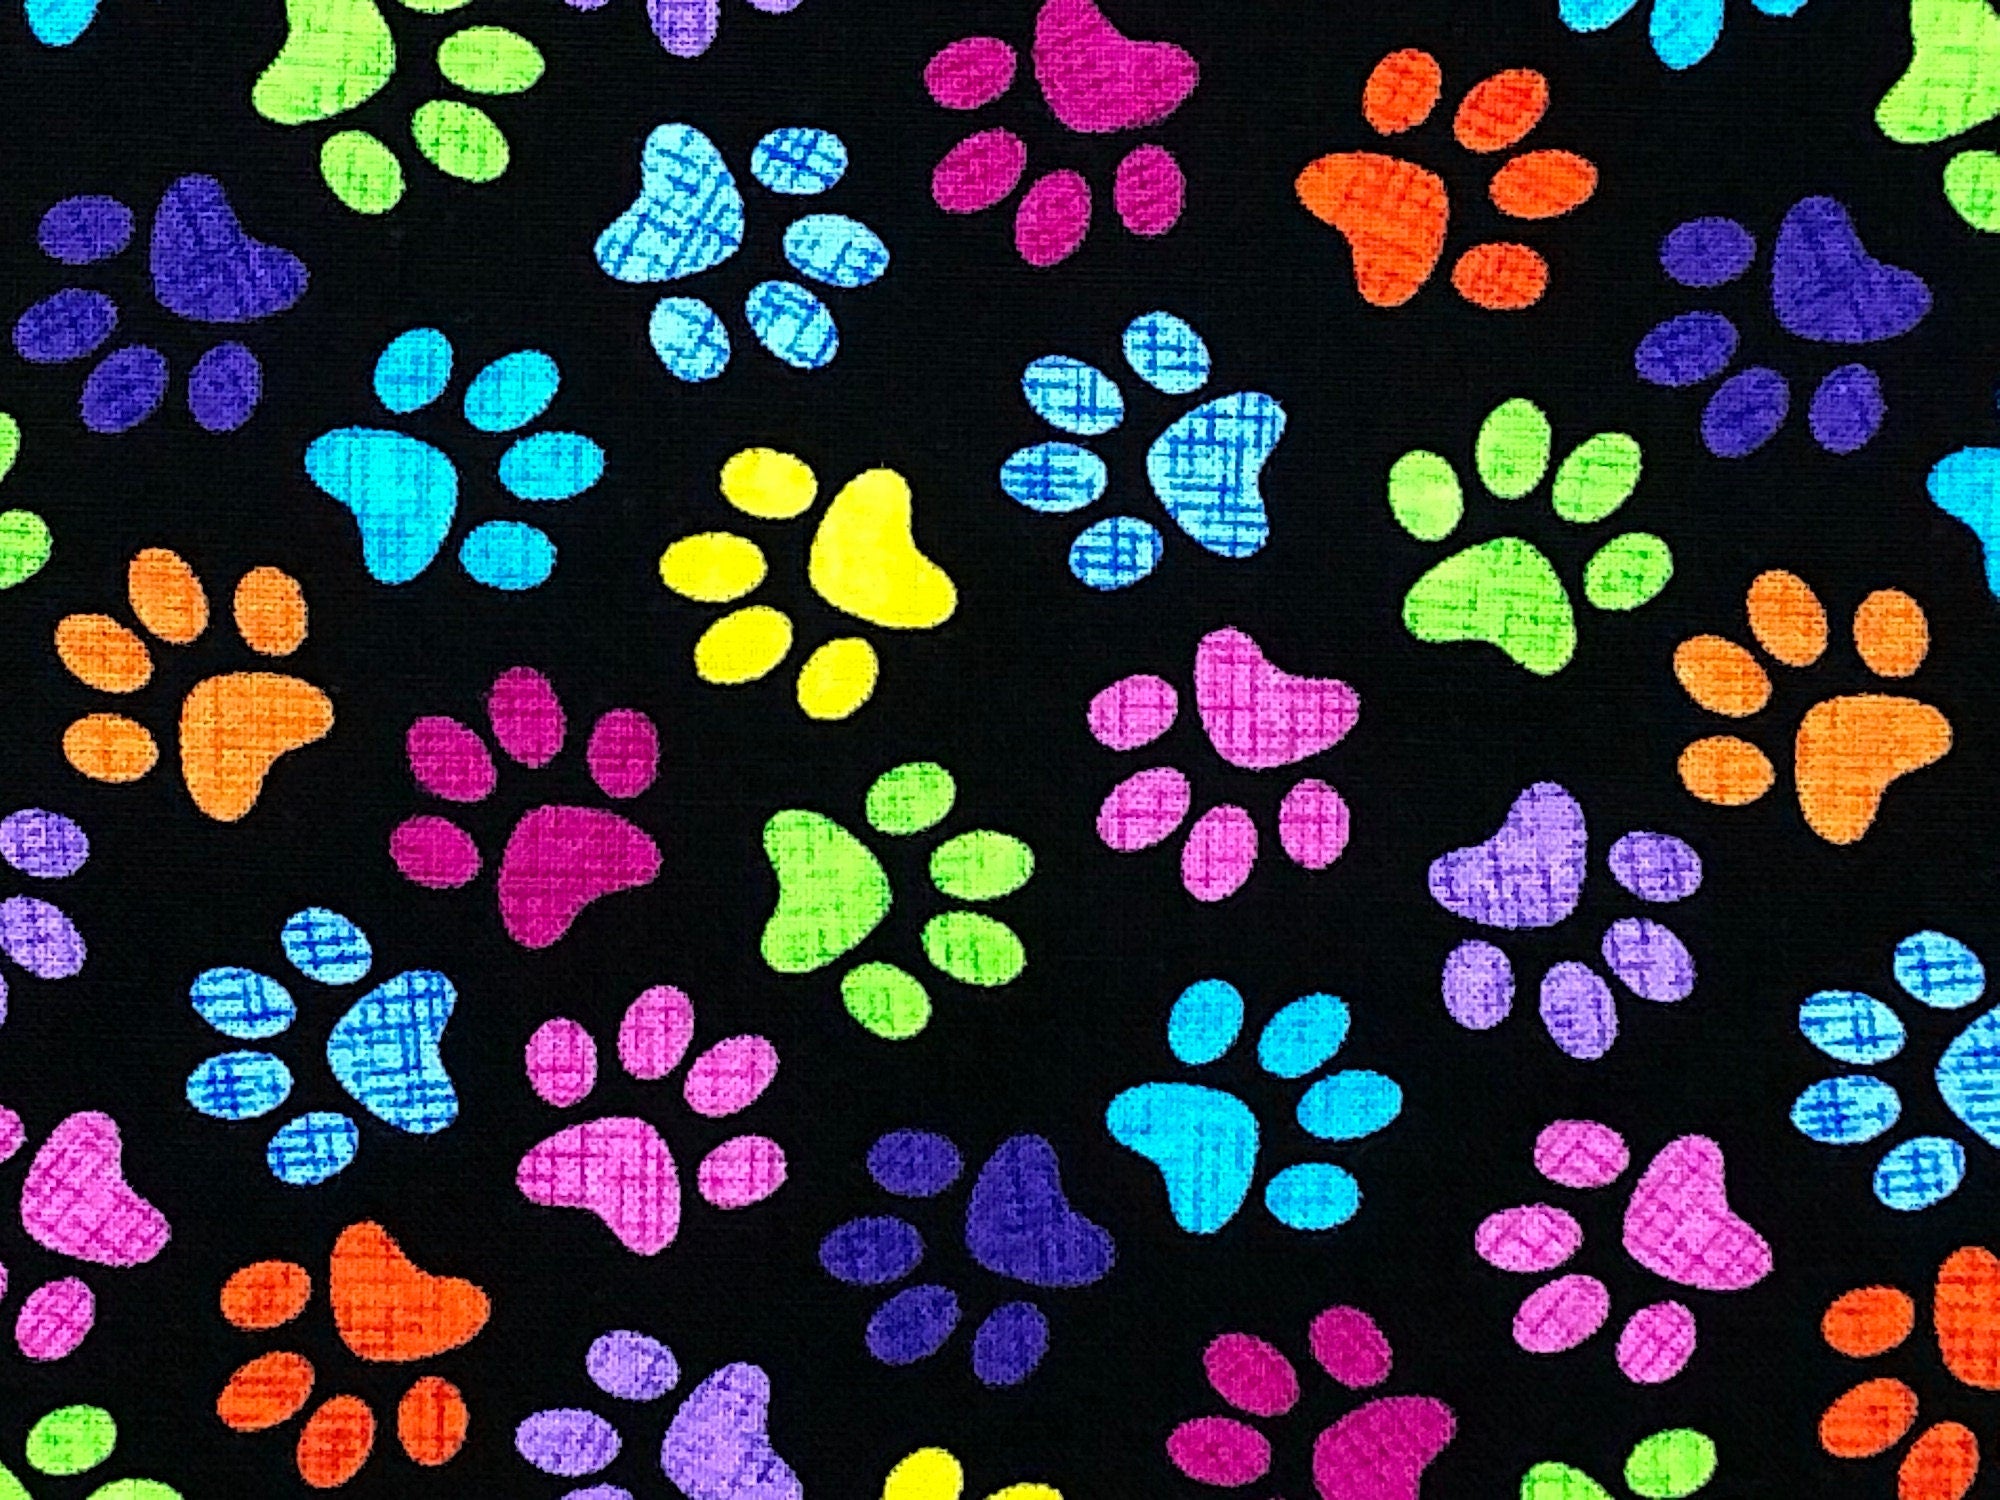 Close up of red, green, blue, purple and pink paw prints on black fabric.